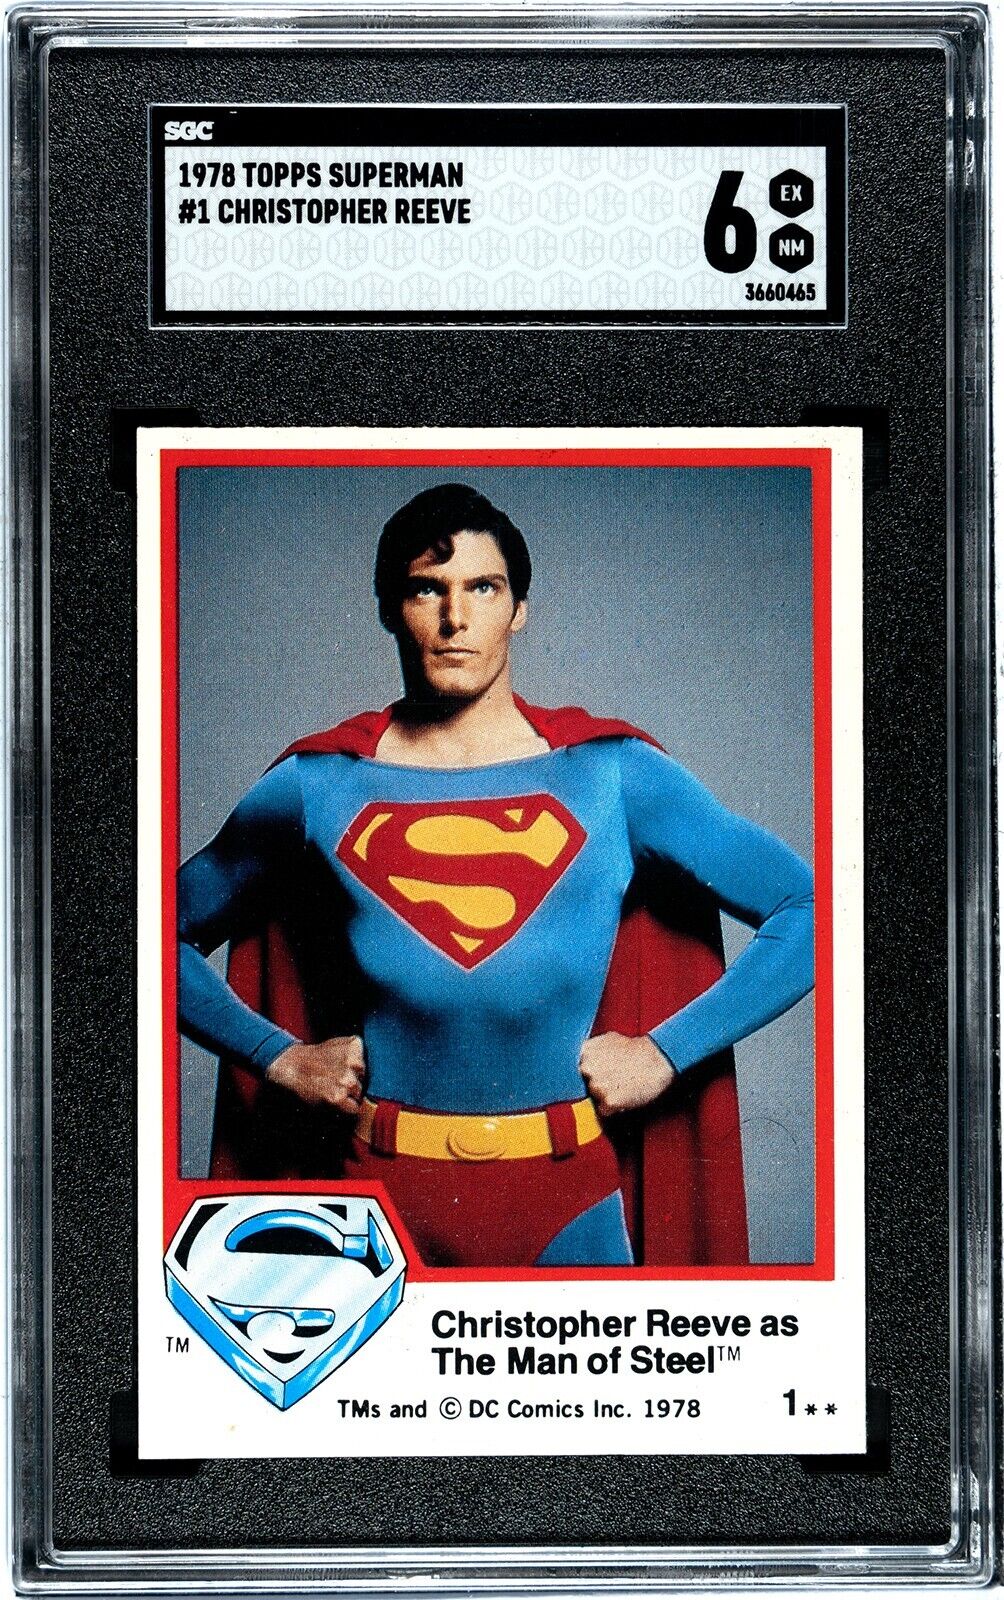 1978 Topps Superman The Movie Christopher Reeve #1 SGC 6